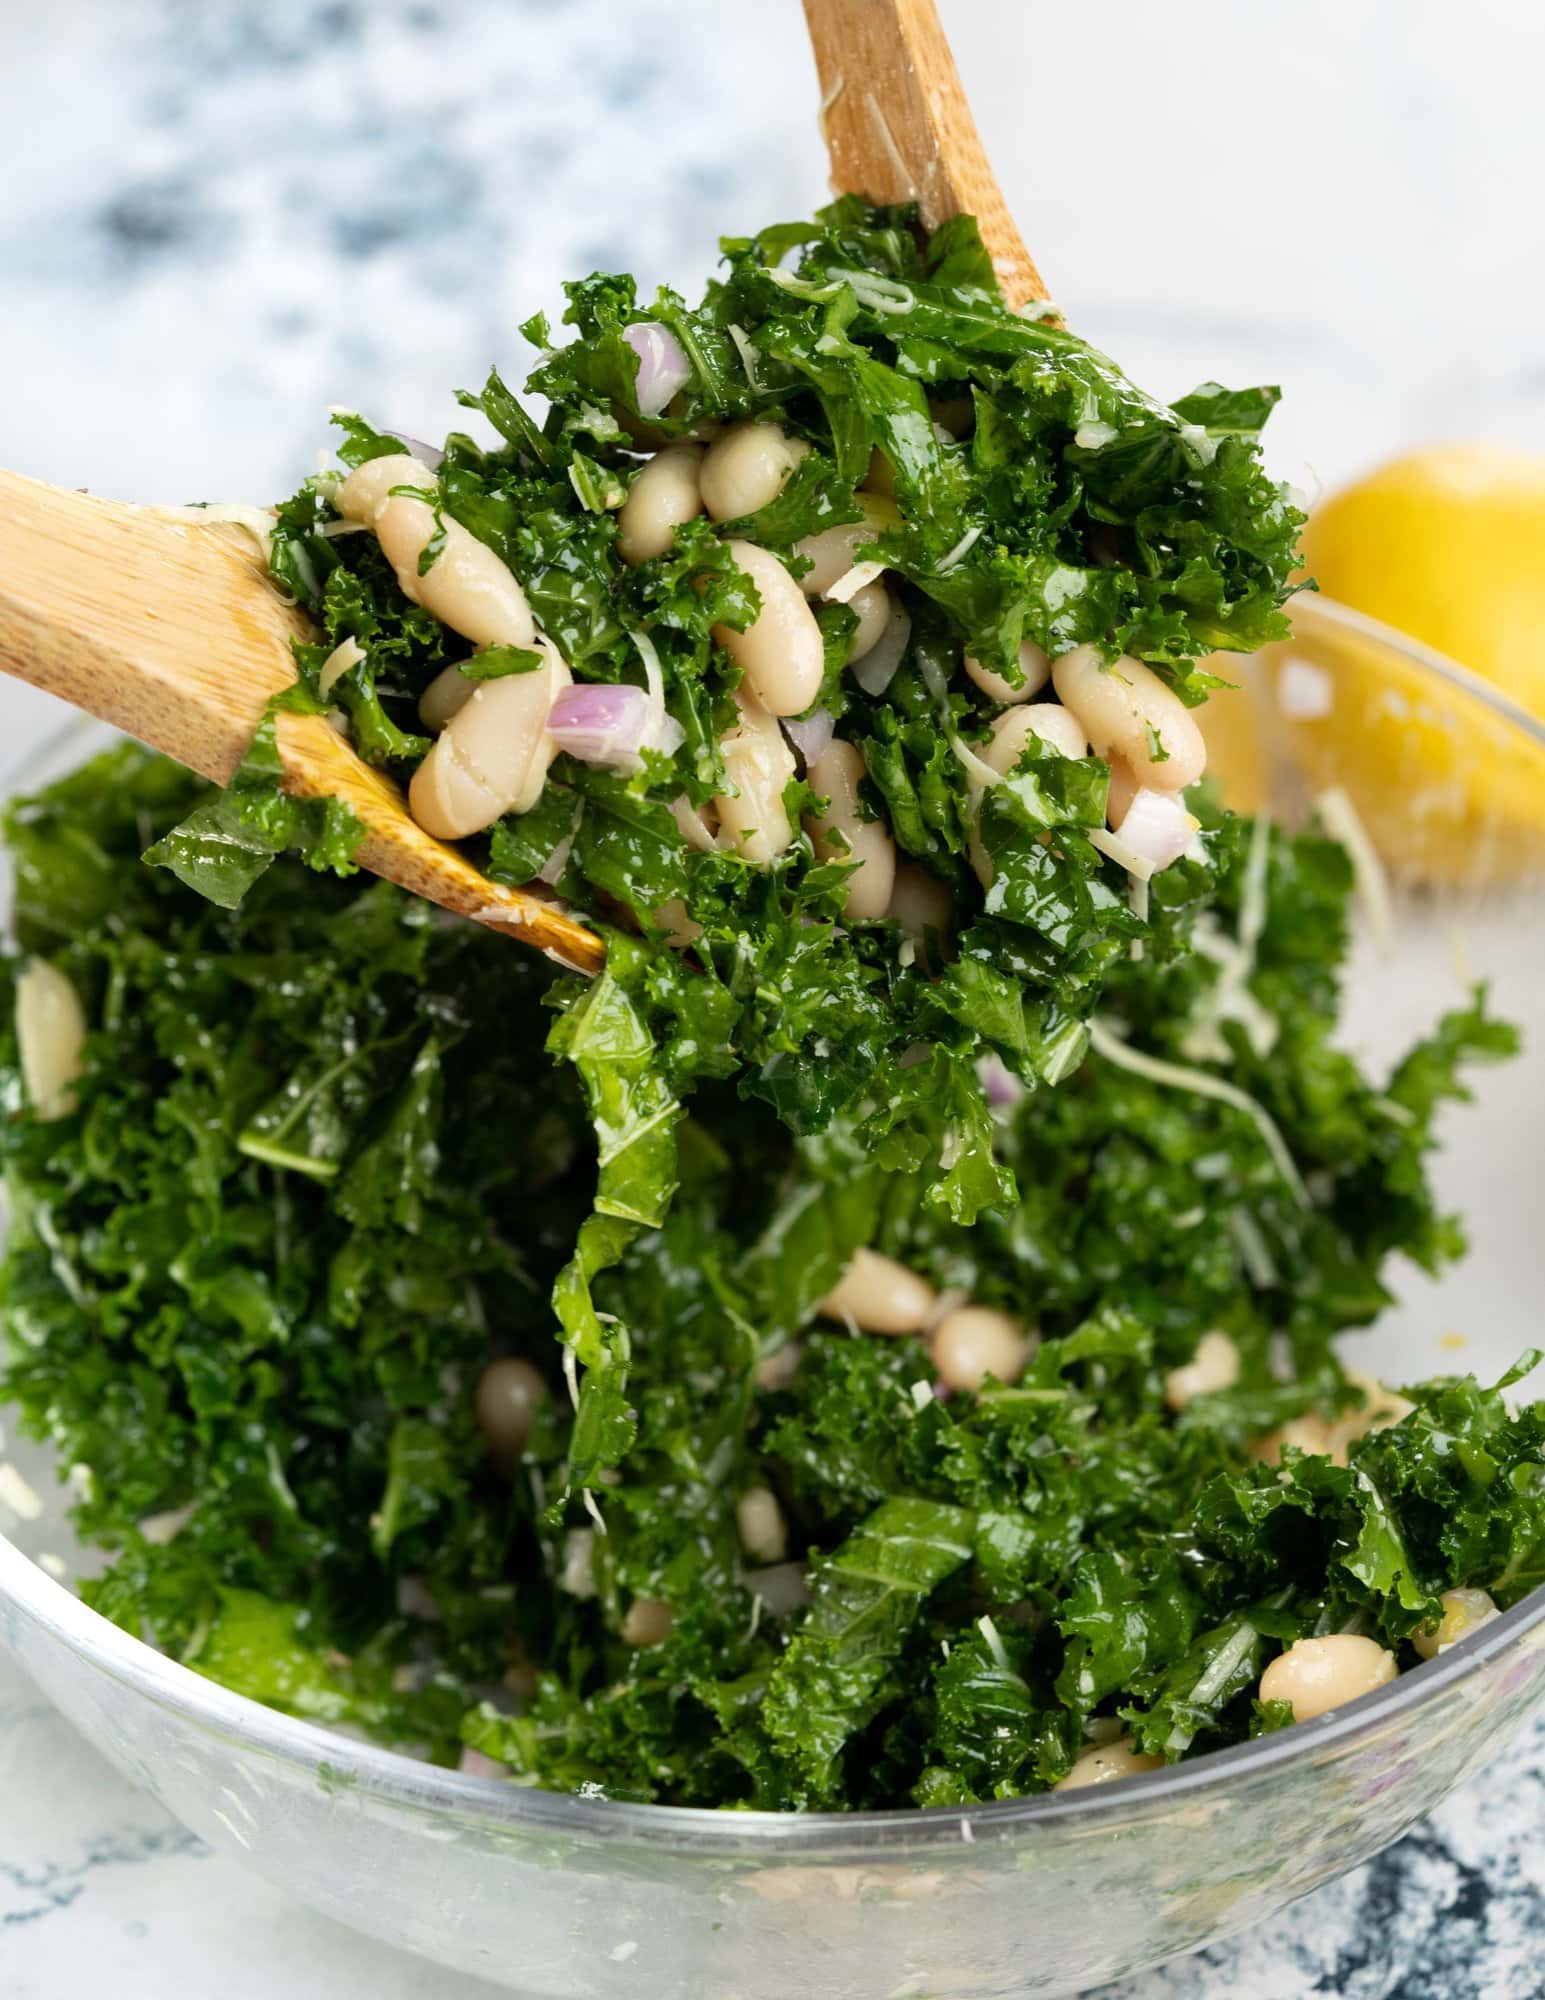 A bunch of white beans and kale salad being picked up with a wooden spatula.